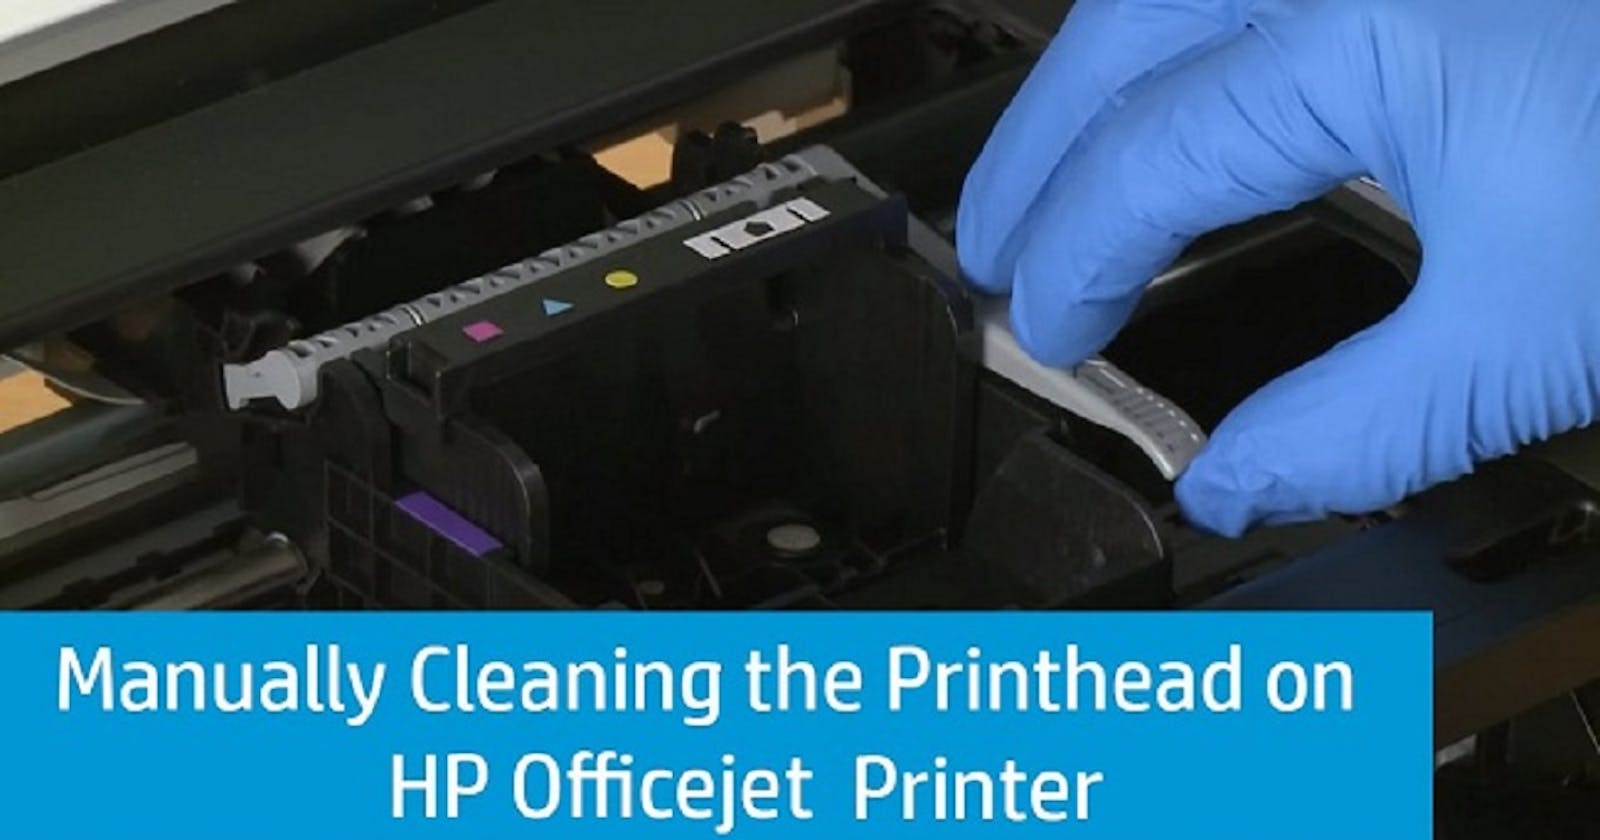 How Can I Fix Problem with Printhead on HP Printers?